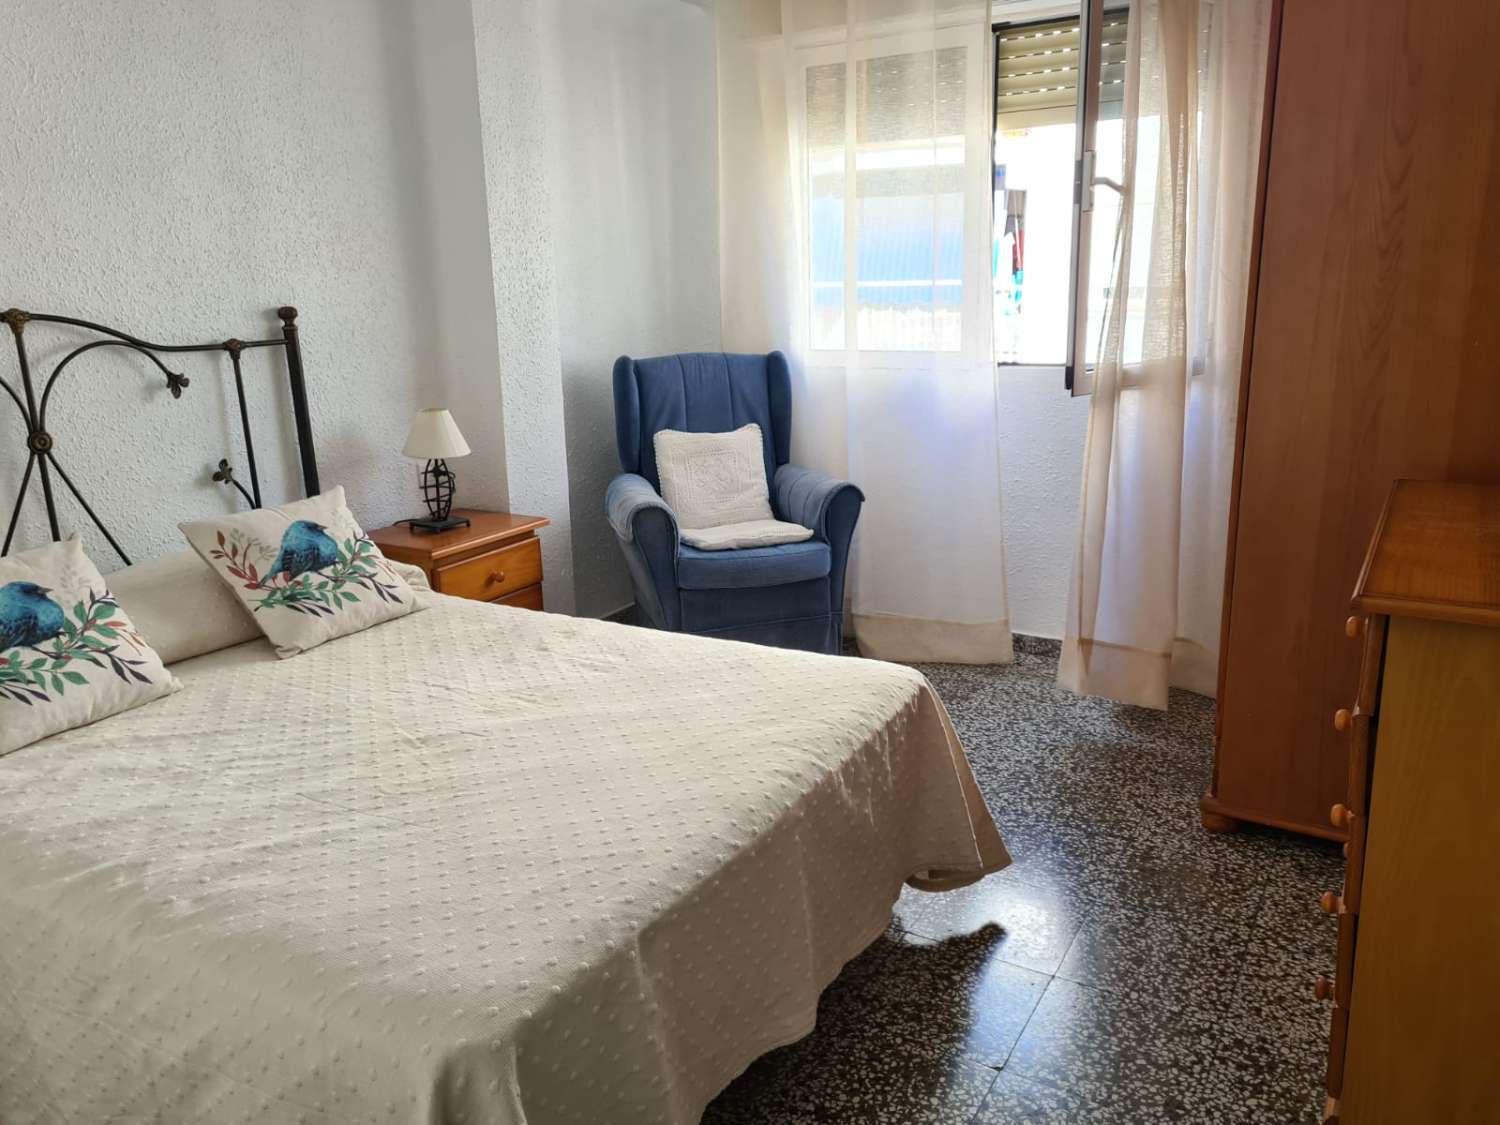 Flat for holidays in Nerja